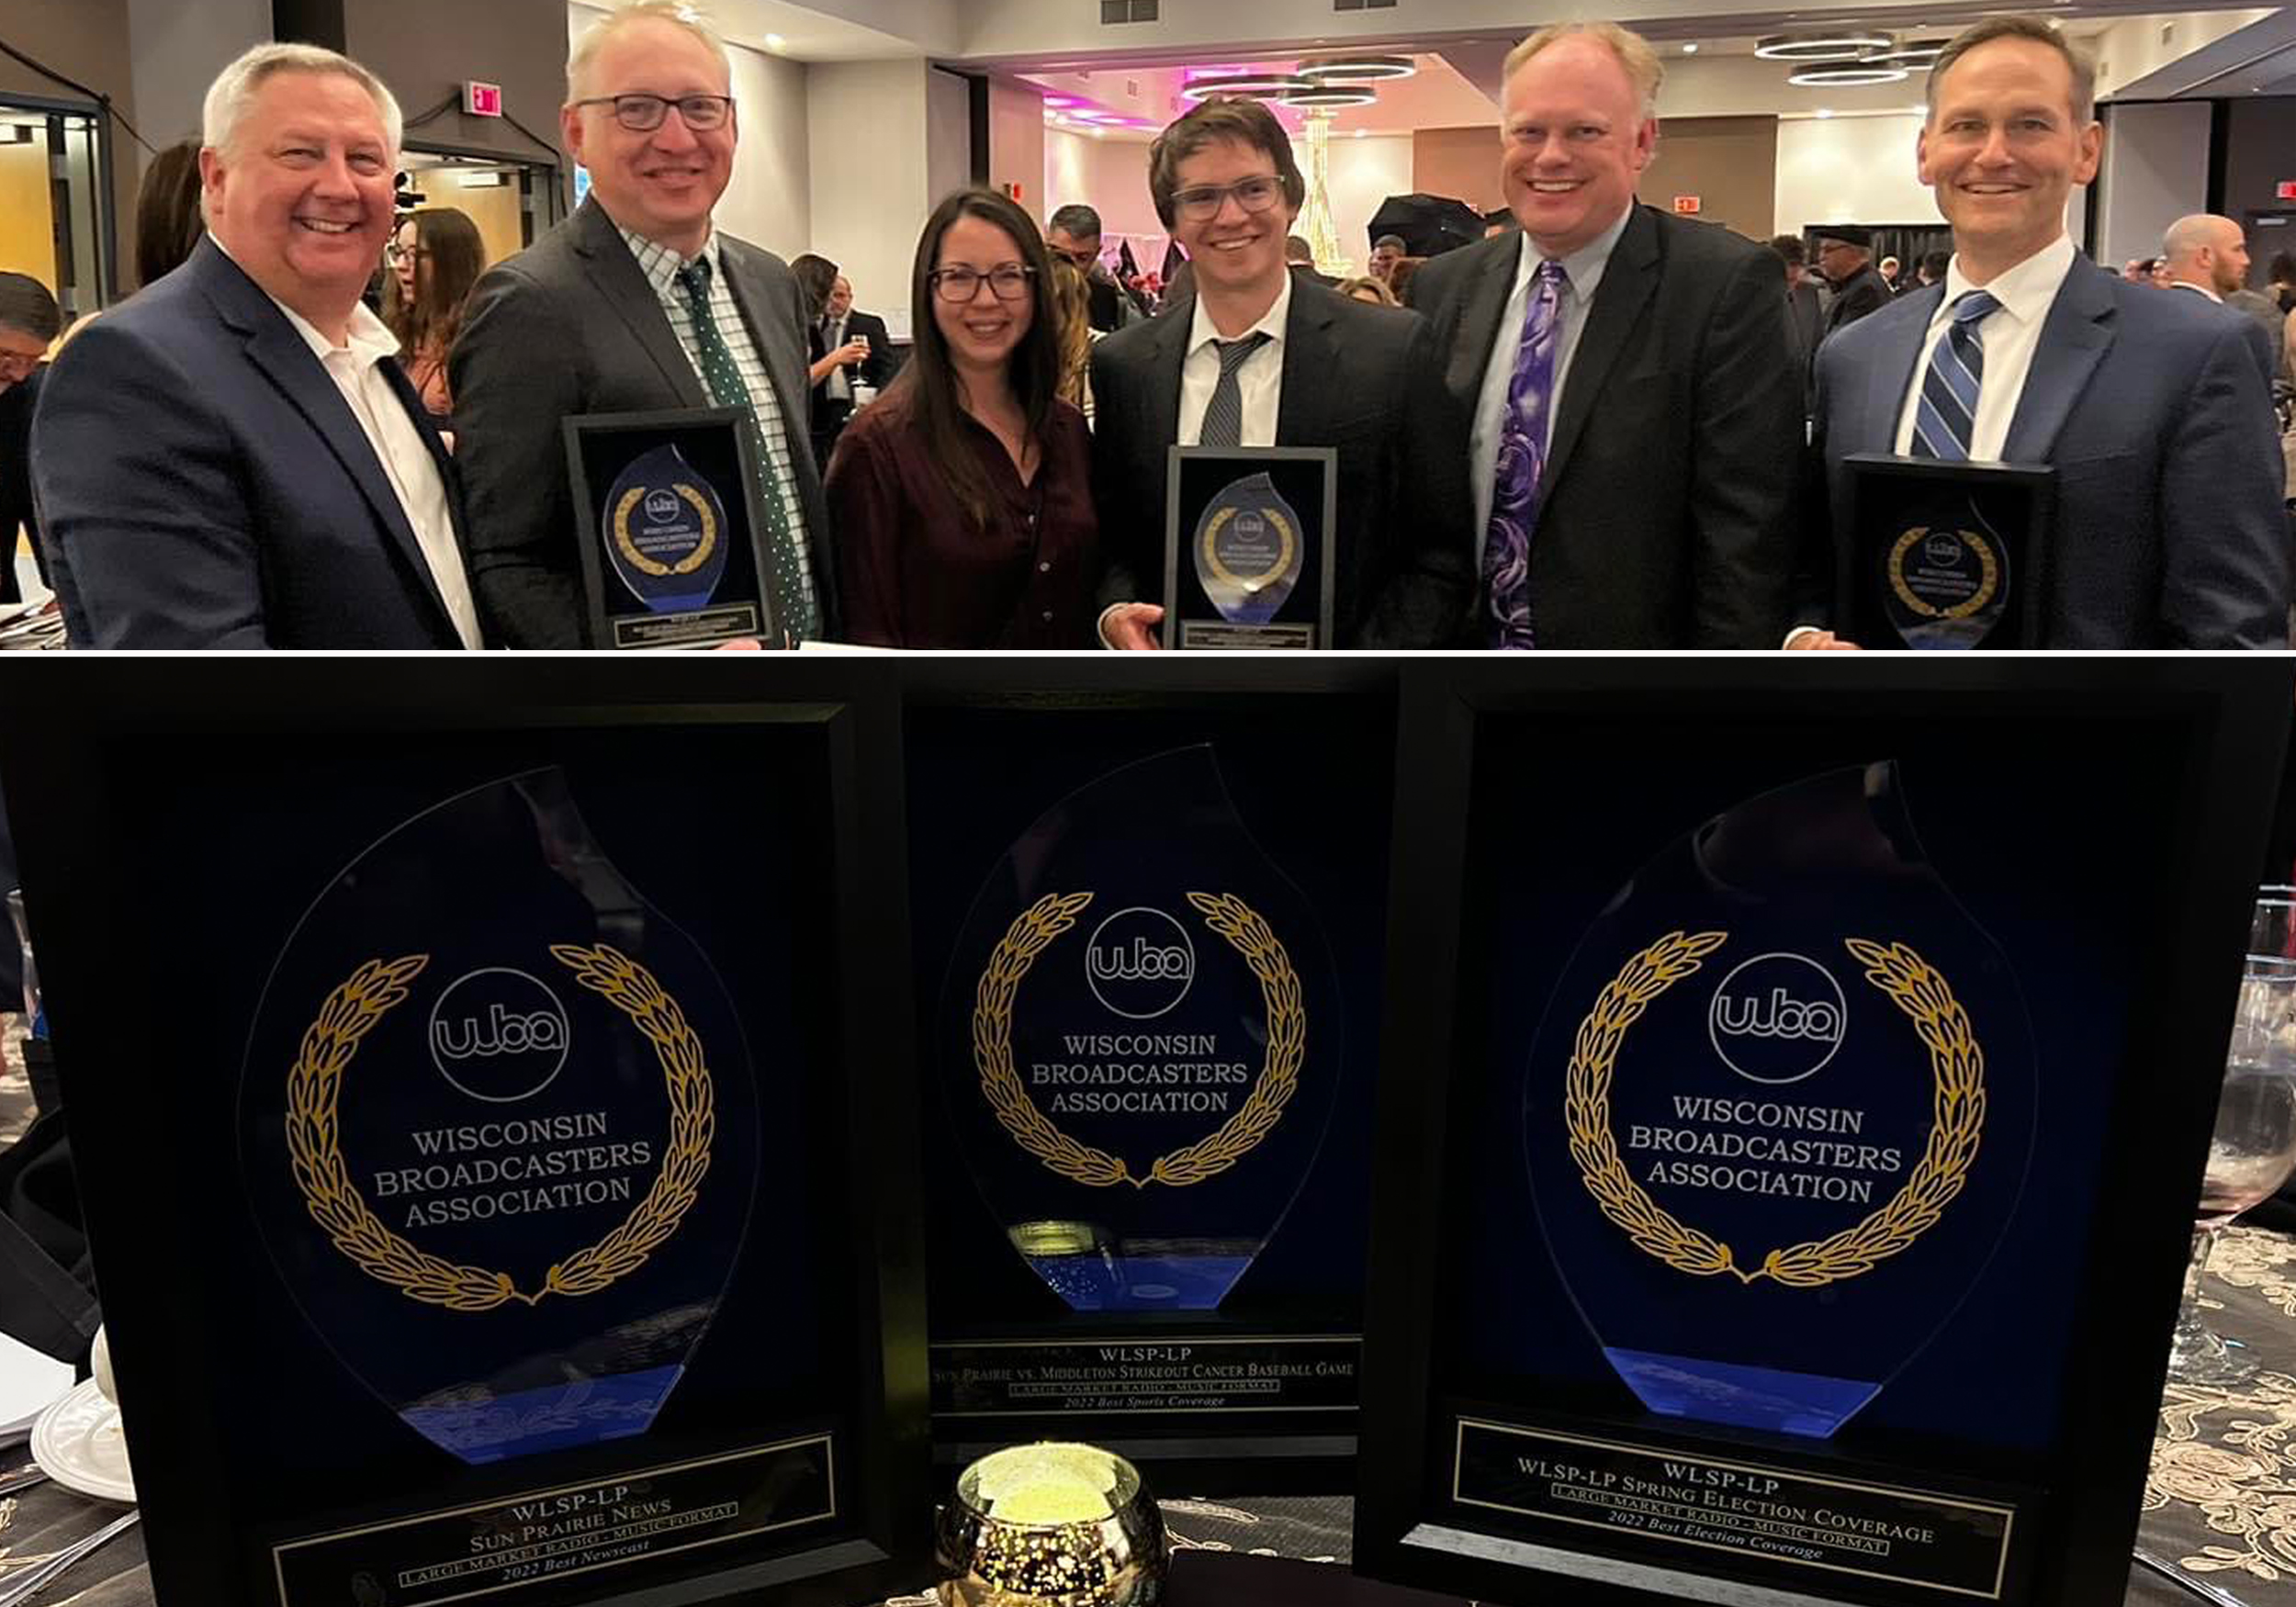 103.5FM SCORES FIVE WISCONSIN BROADCASTERS ASSOCIATION AWARDS INCLUDING THREE FIRST PLACE AWARDS